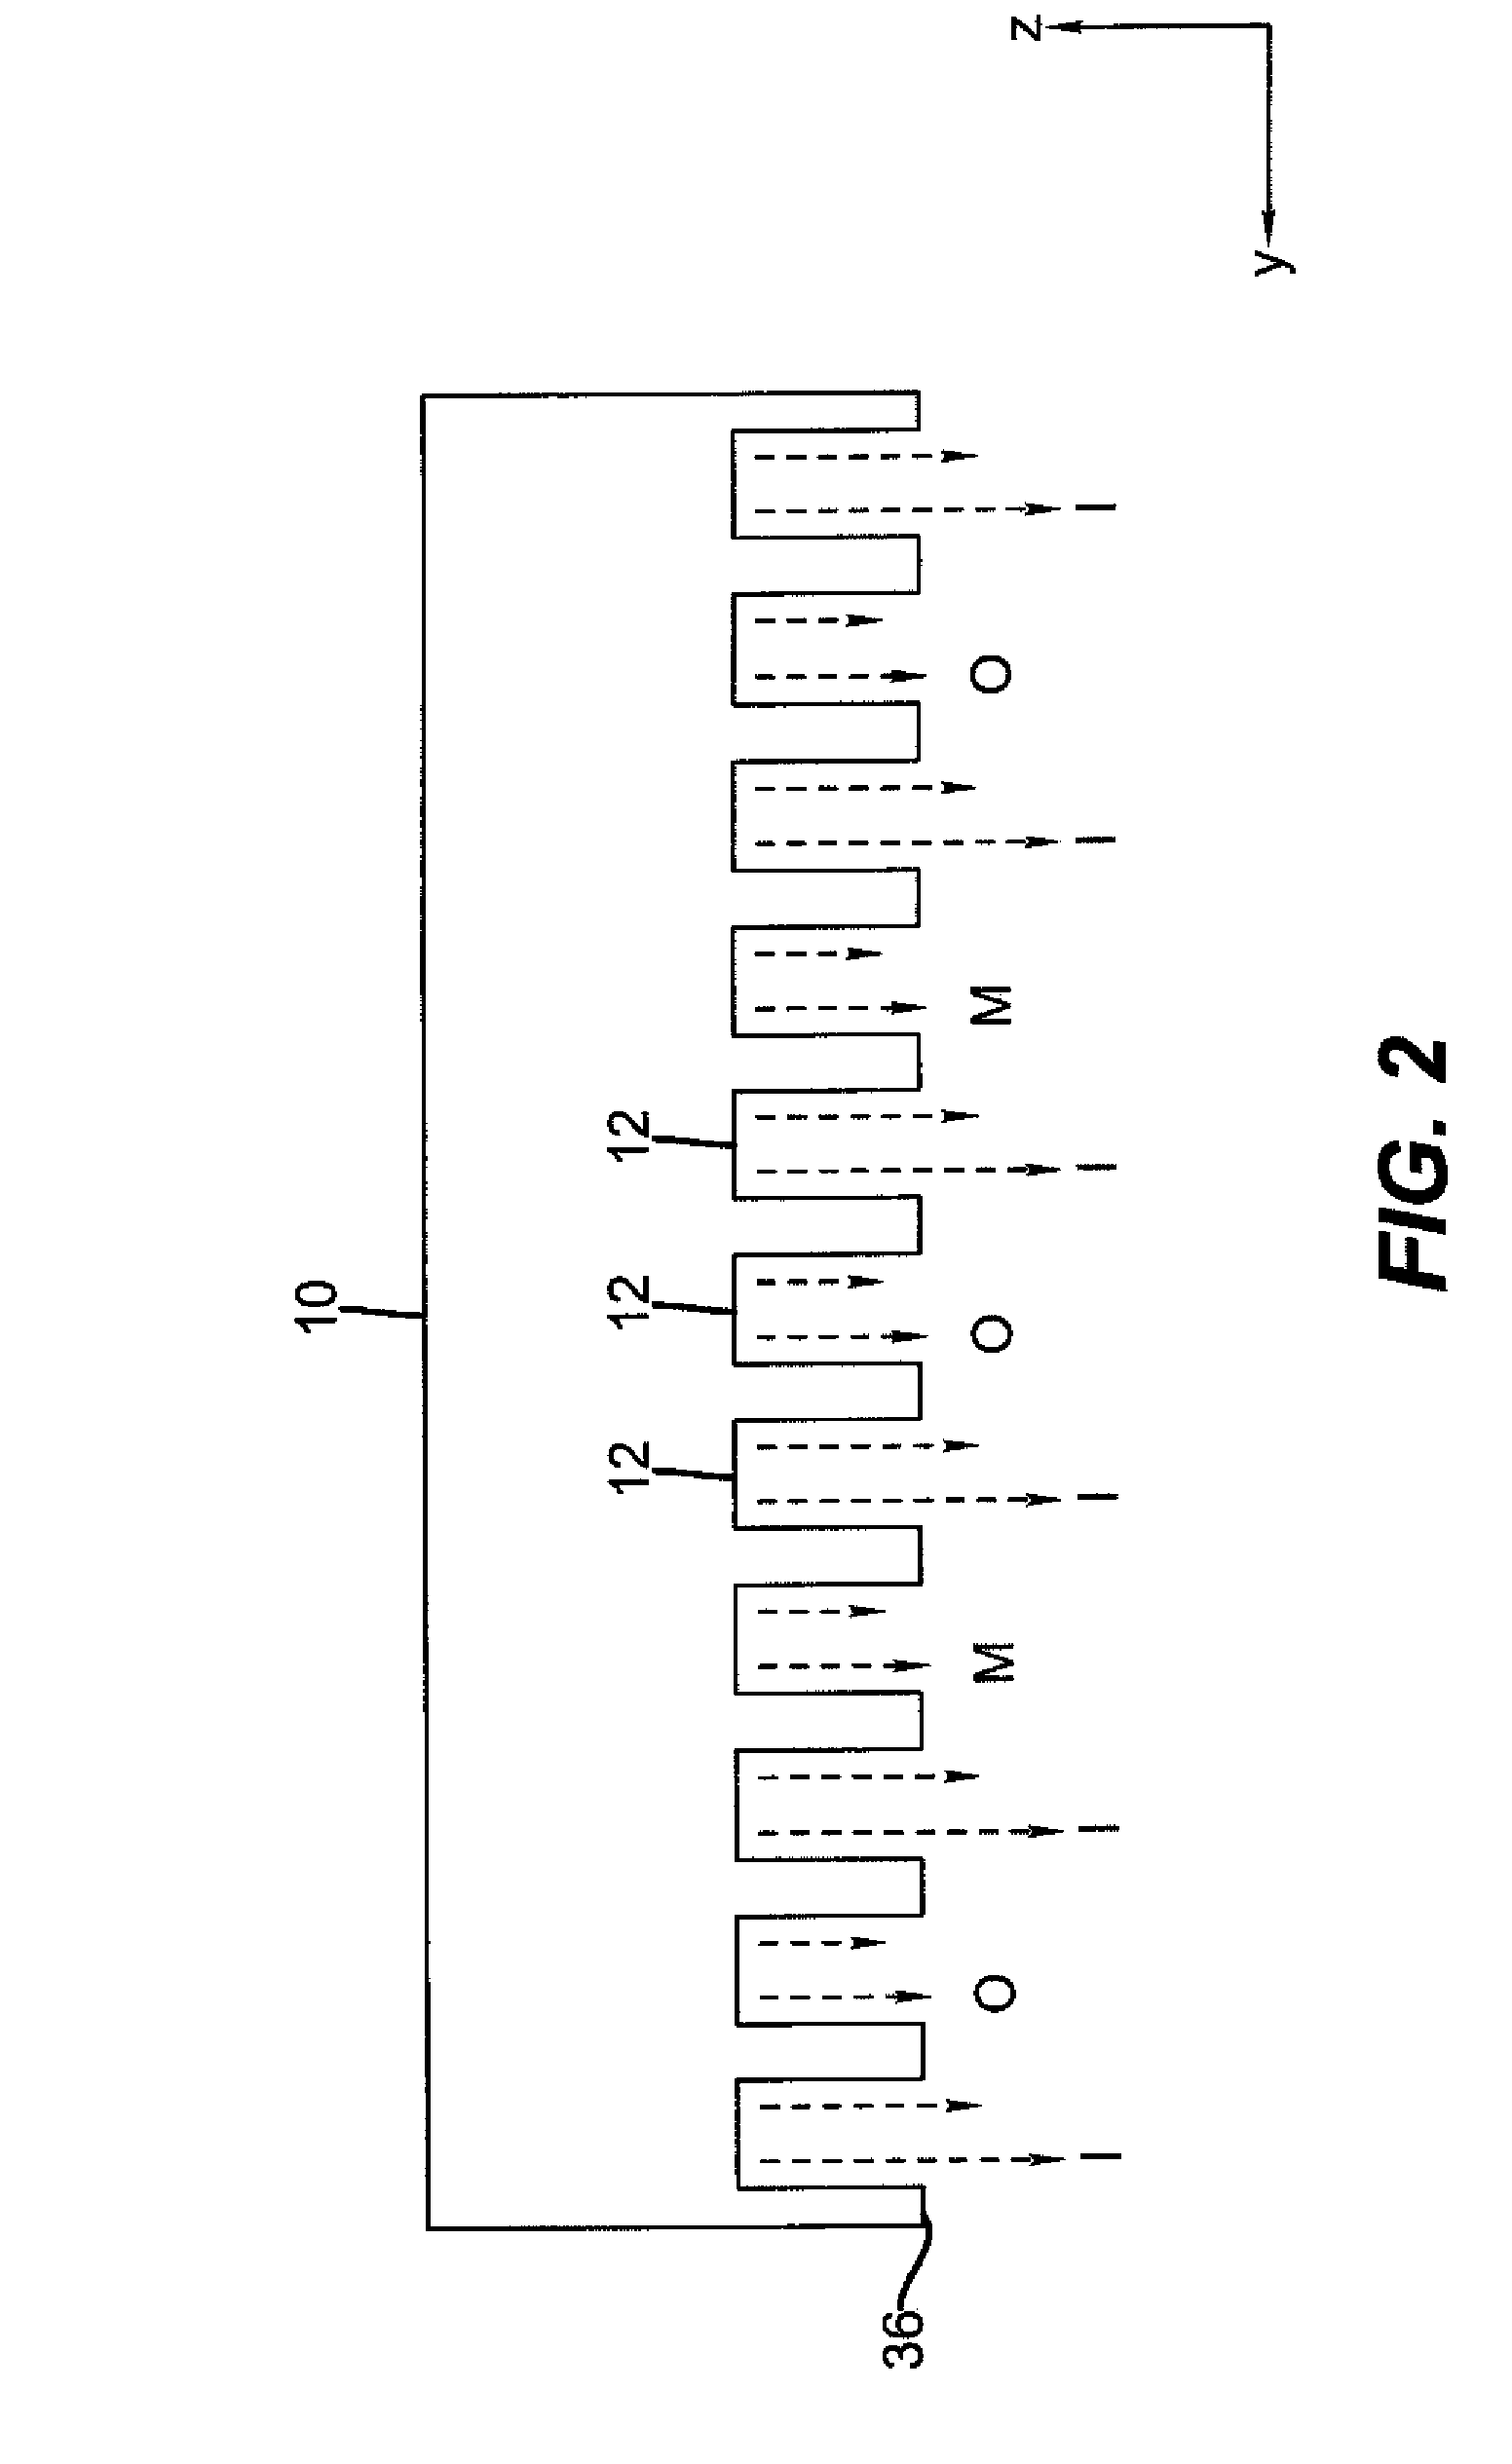 Deposition system for thin film formation